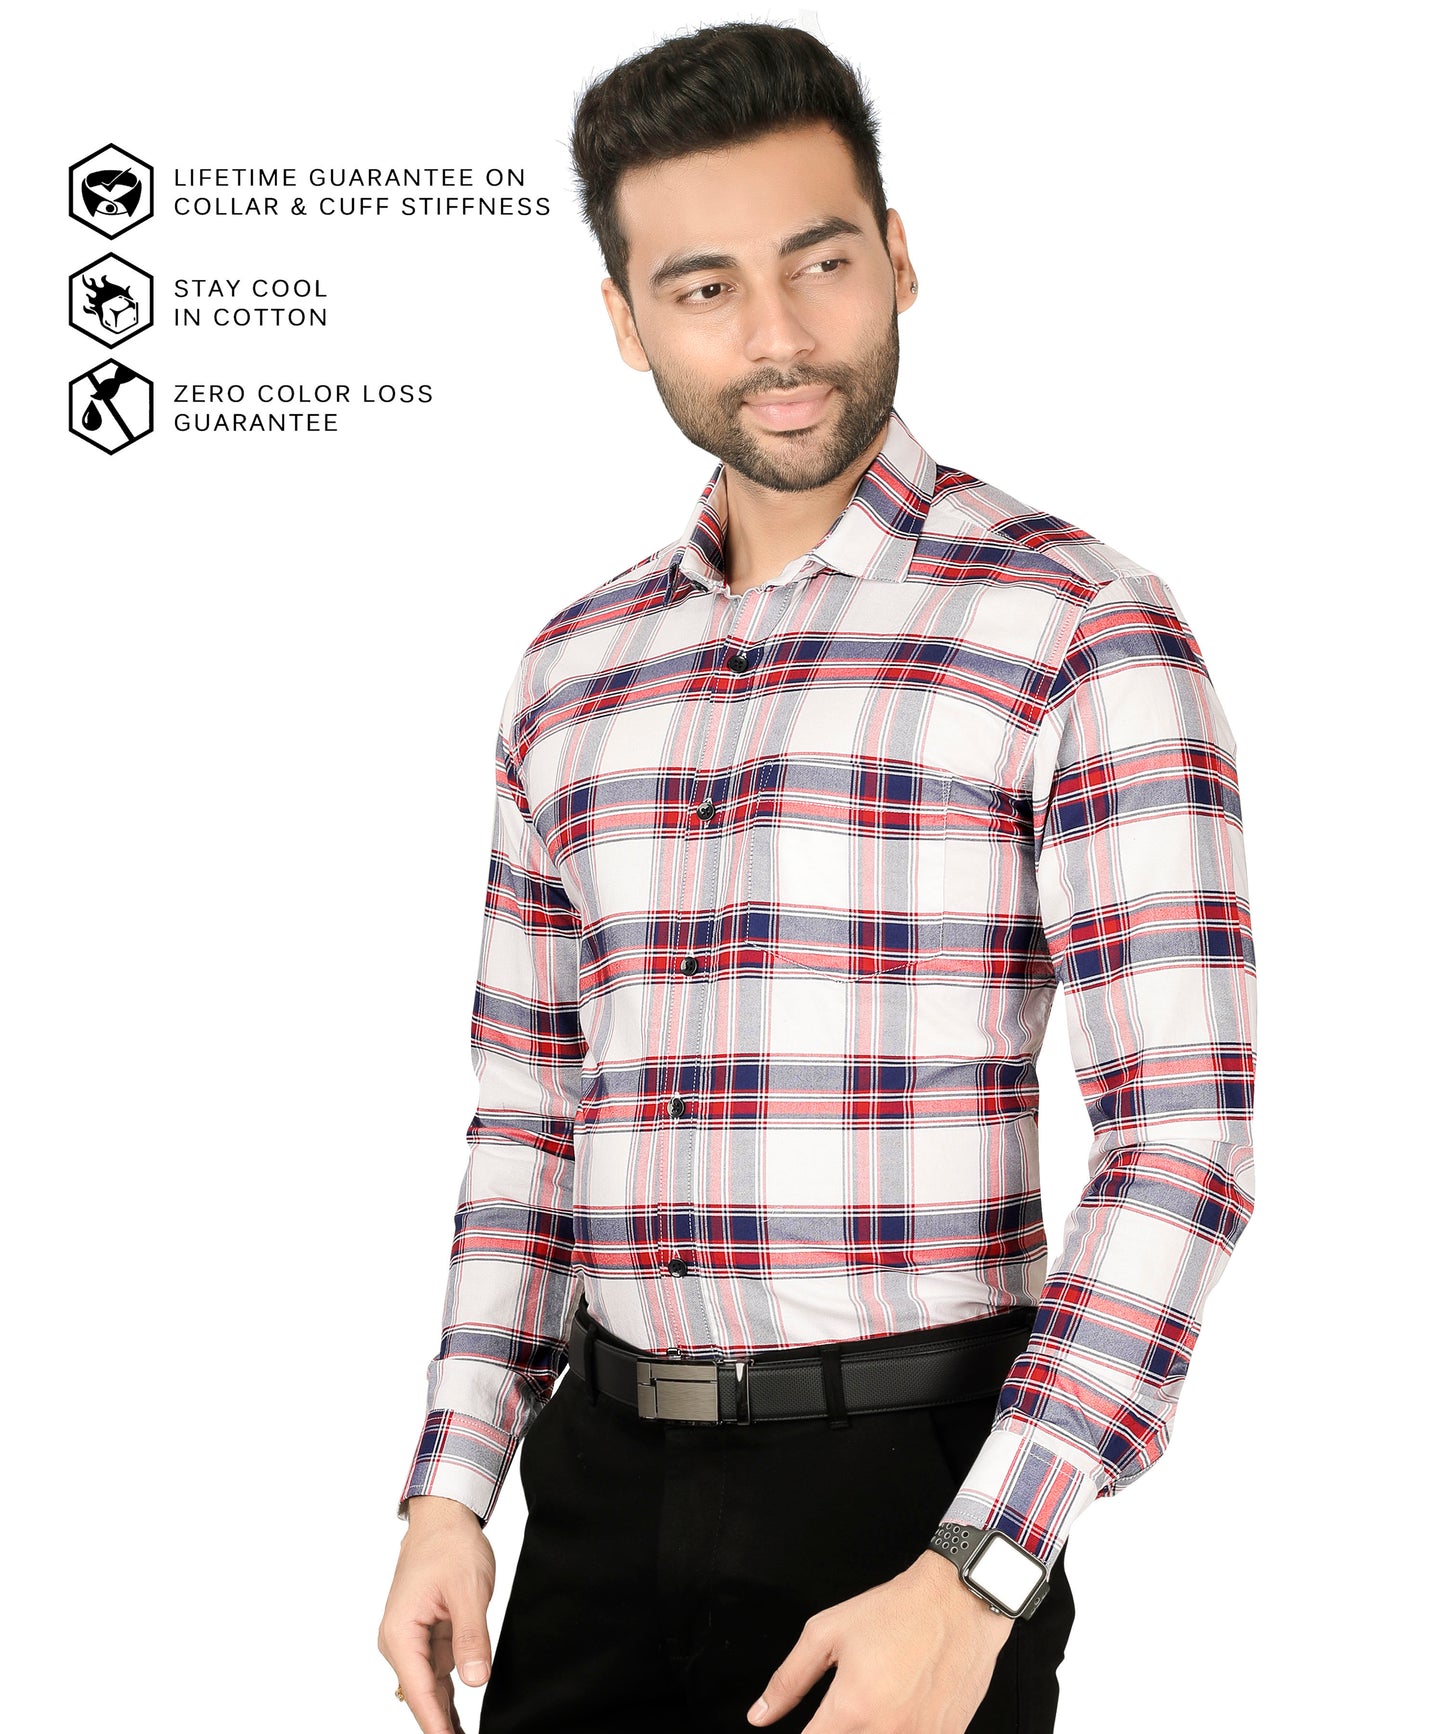 5thanfold Men's Formal Pure Cotton Full Sleeve Checkered White Slim Fit Shirt